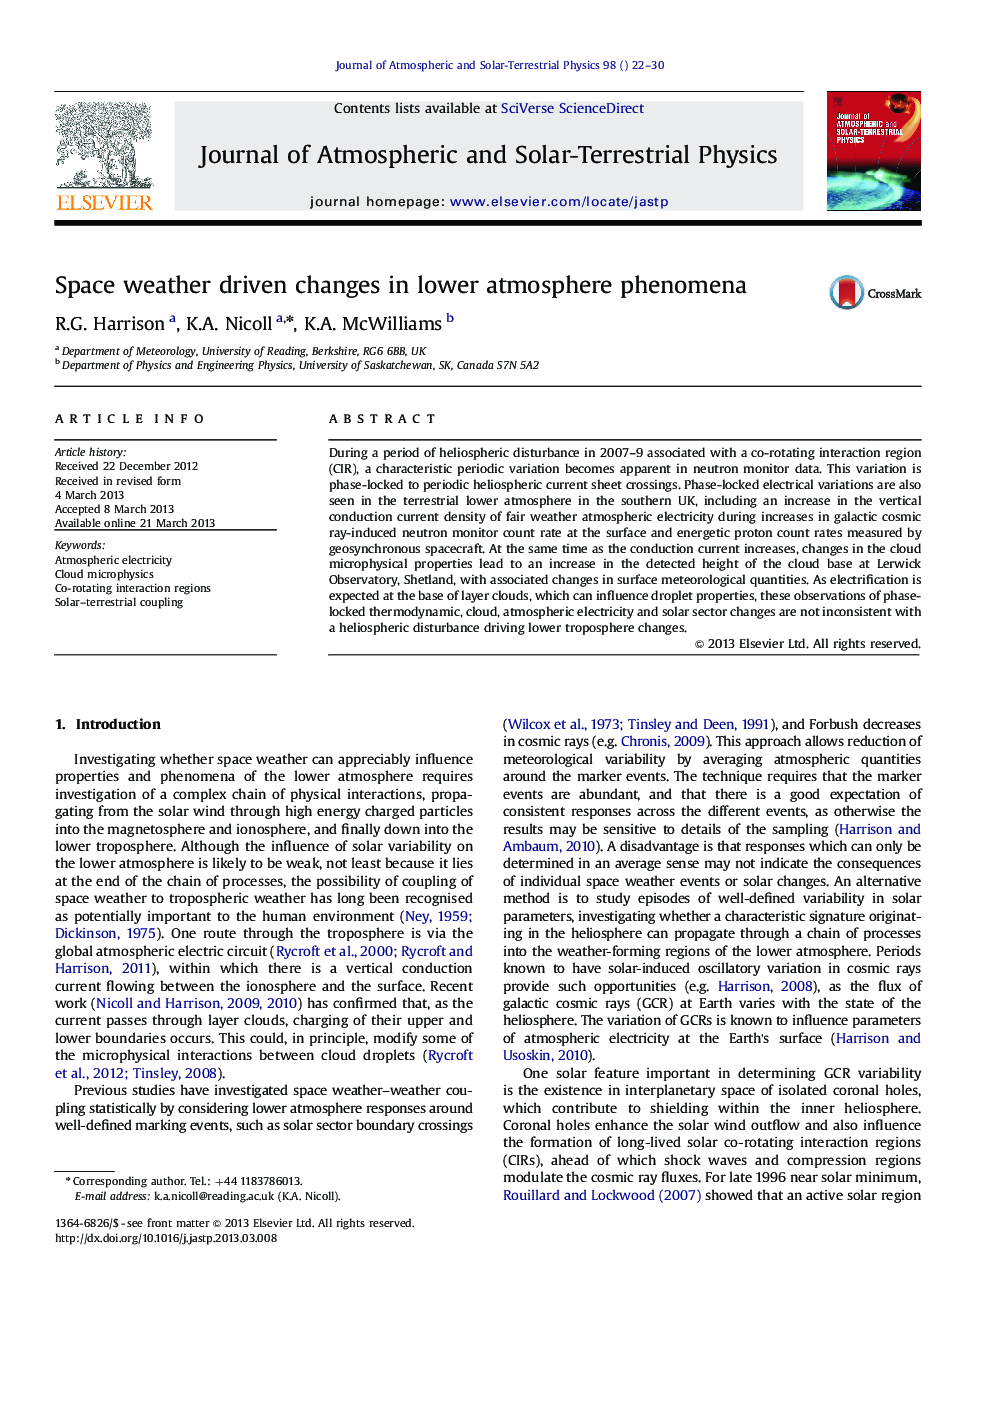 Space weather driven changes in lower atmosphere phenomena